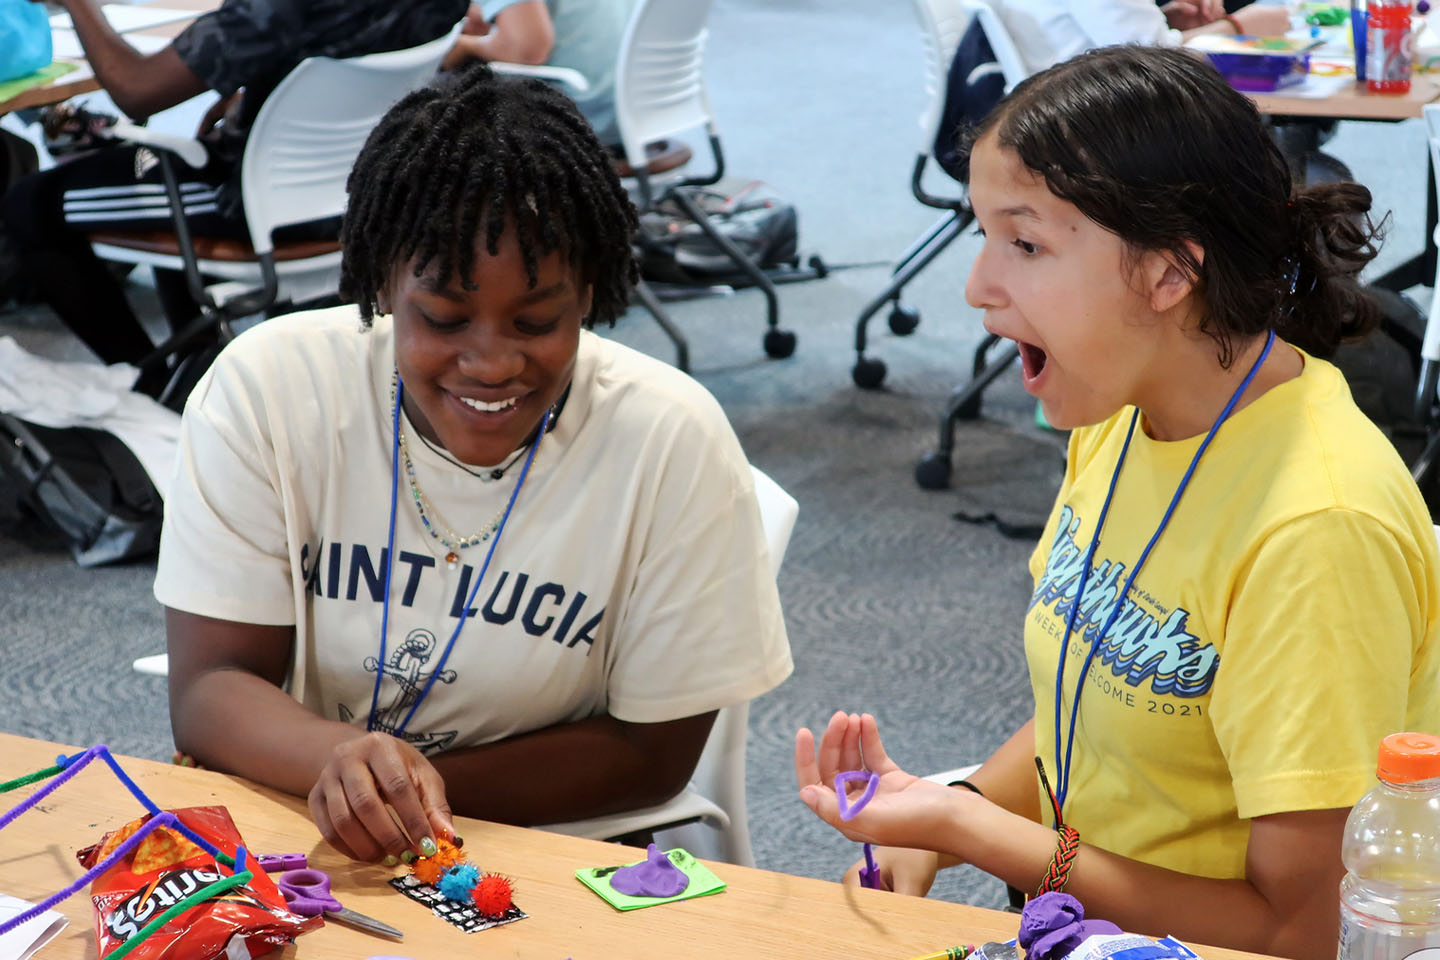 two high school students are excited to participate in an activity using craft supplies